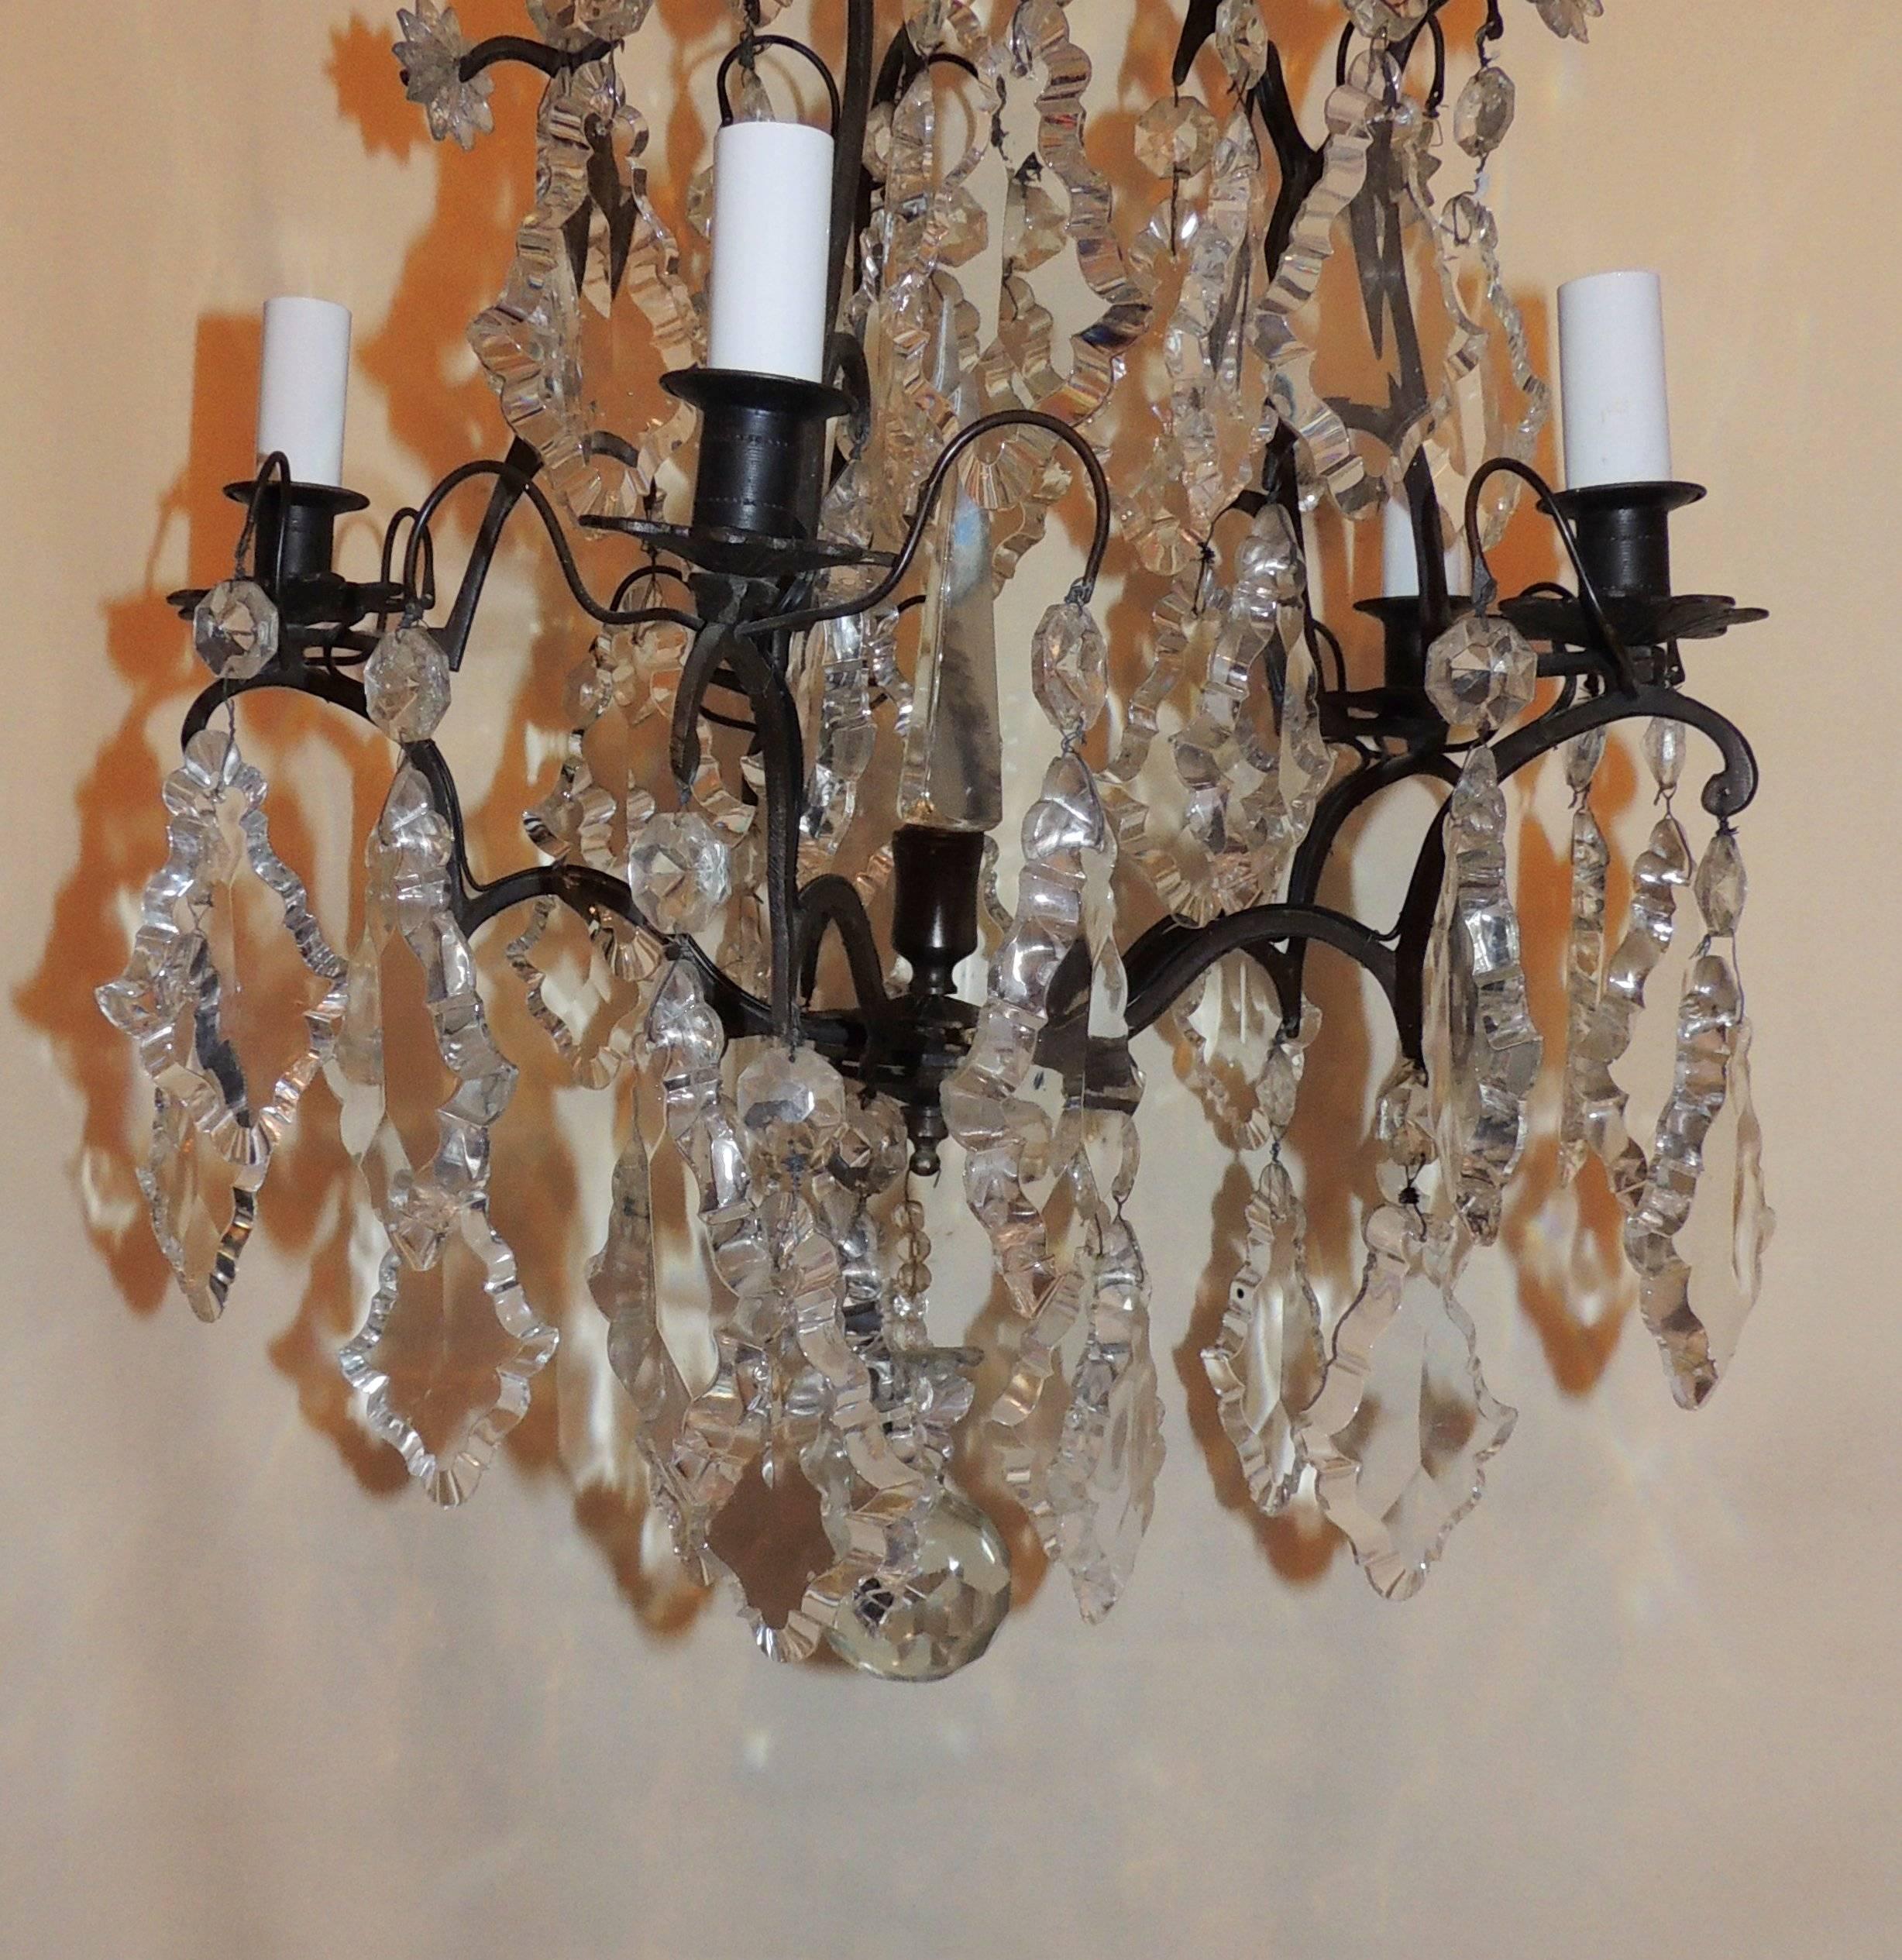 Charming French Patinated Bronze Crystal Five-Light Chandelier Bird Cage Fixture In Good Condition For Sale In Roslyn, NY